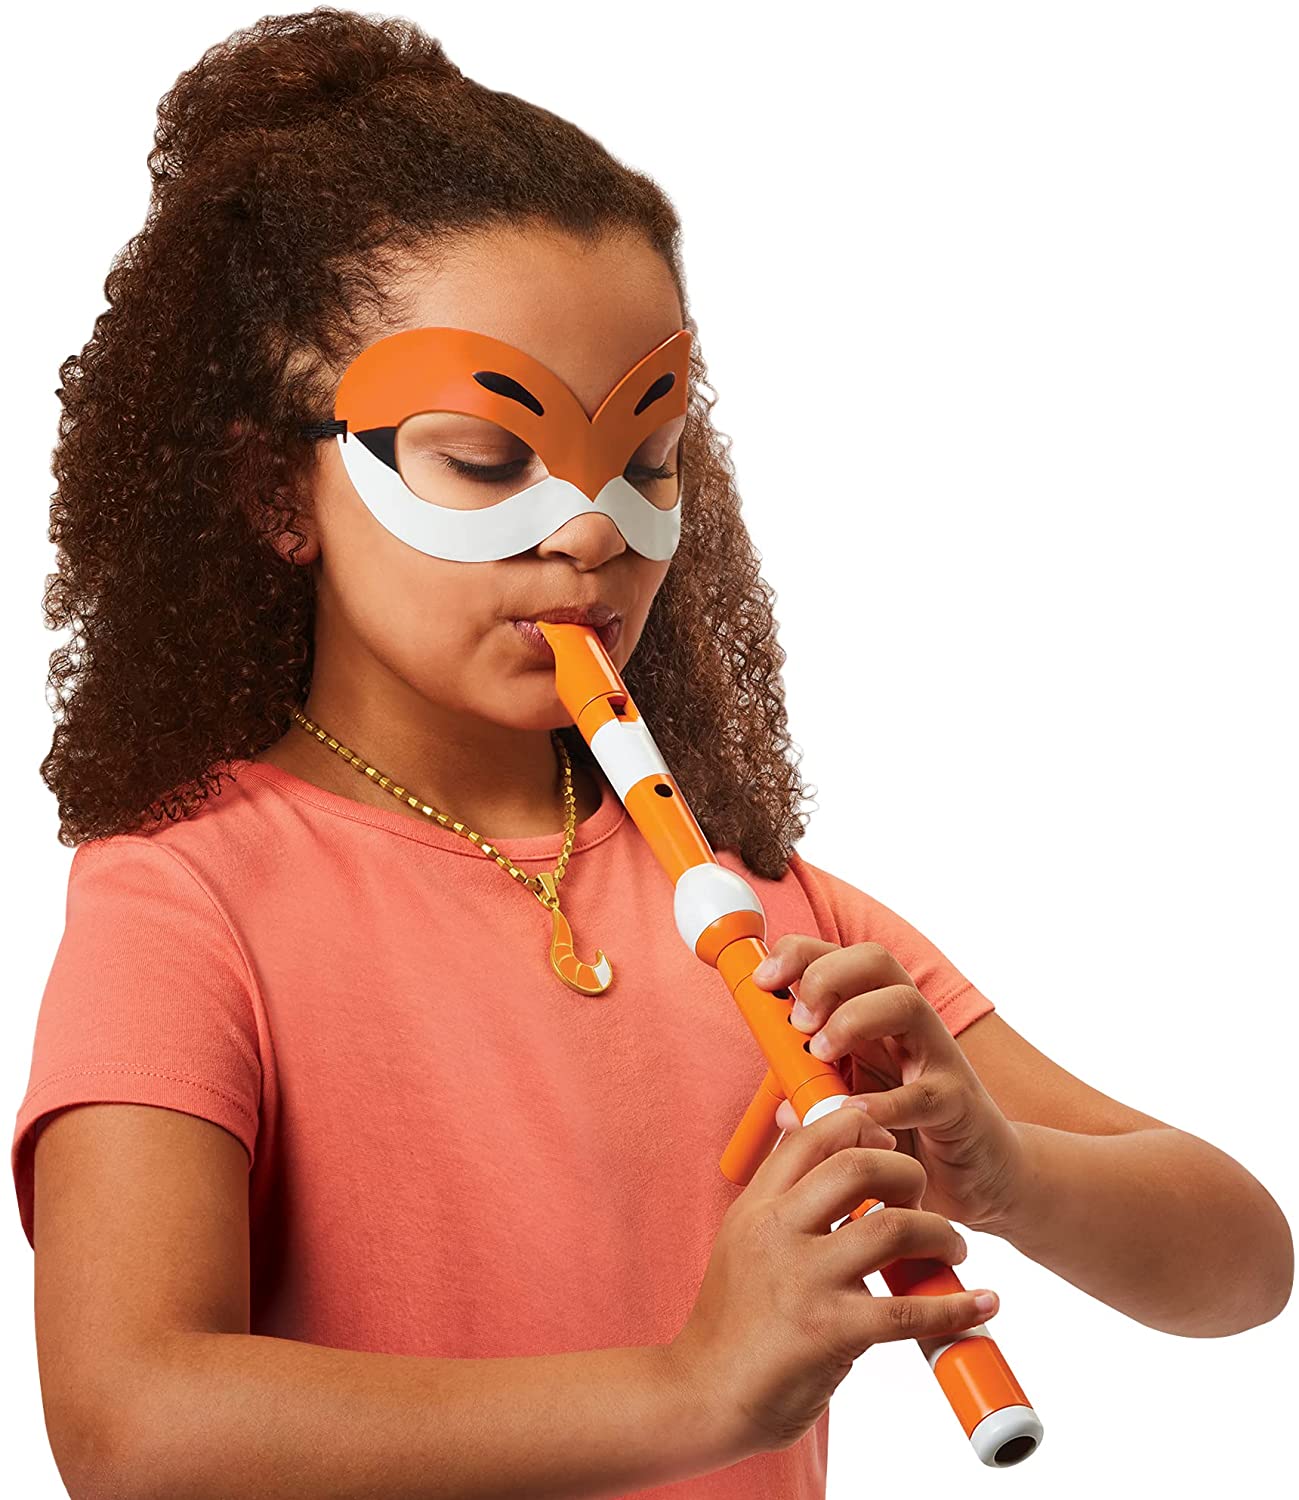 Miraculous Ladybug Rena Rouge Dress Up Set with Flute, kwami, mask and Fox Pendant by Playmates Toys - Dress up and pretend play Heretoserveyou